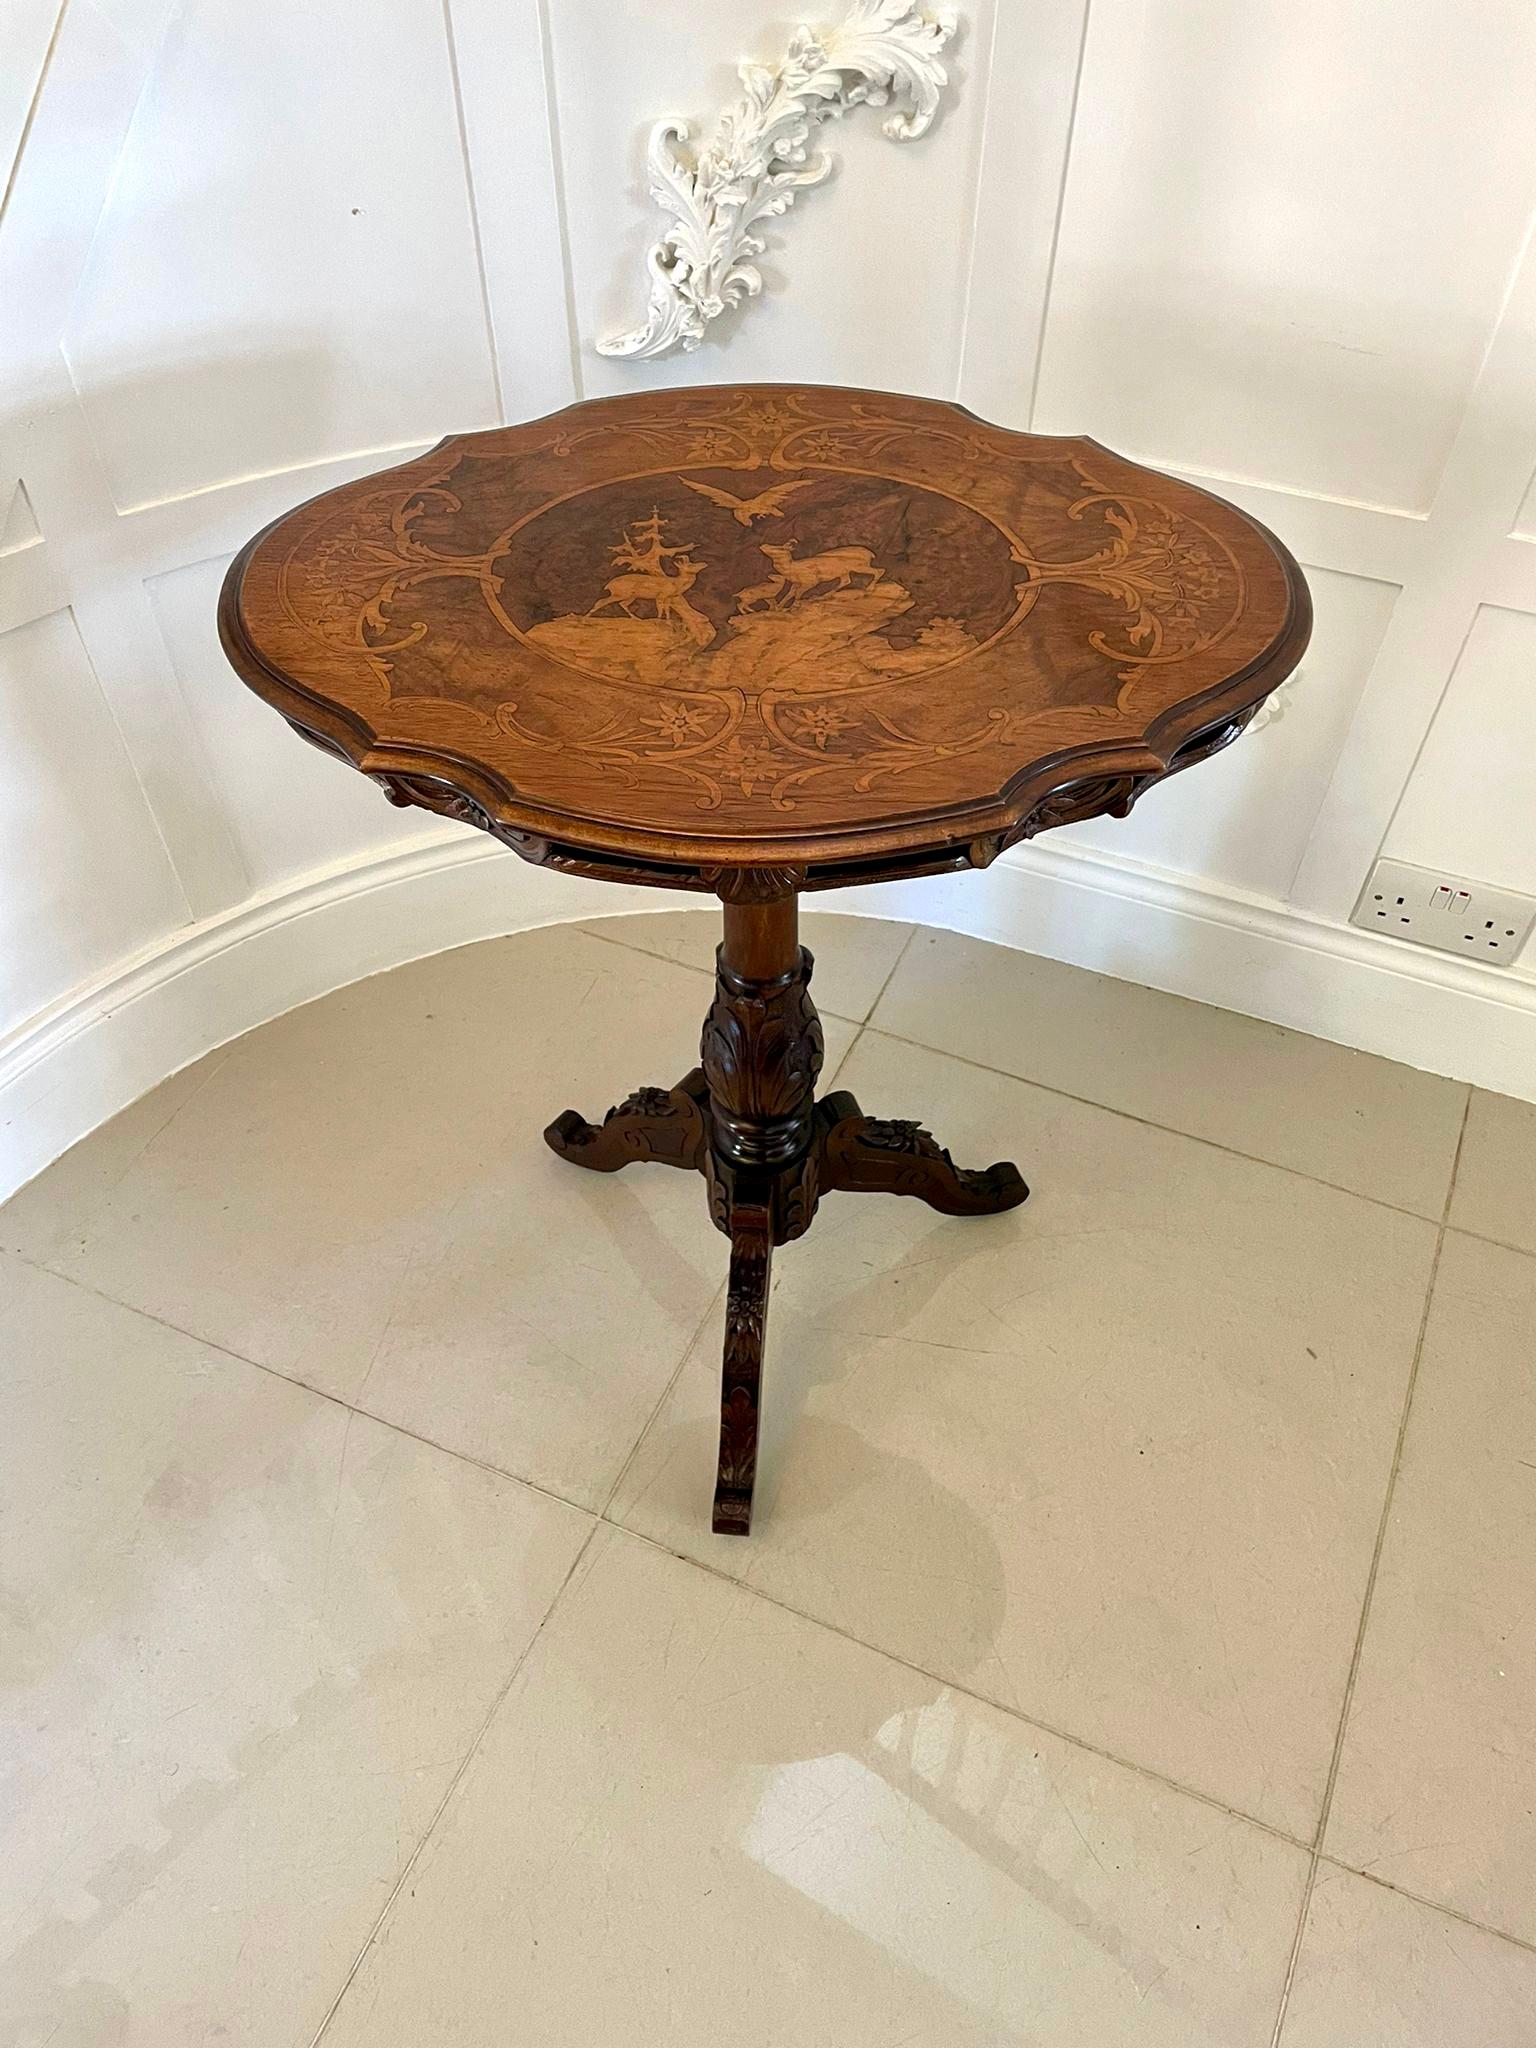 Unusual Antique Victorian quality marquetry inlaid walnut Swiss Black Forest table having a fantastic quality burr walnut marquetry beautifully inlaid serpentine shaped tilt top with decorated panels of mountain deer, lbex birds and foliage,